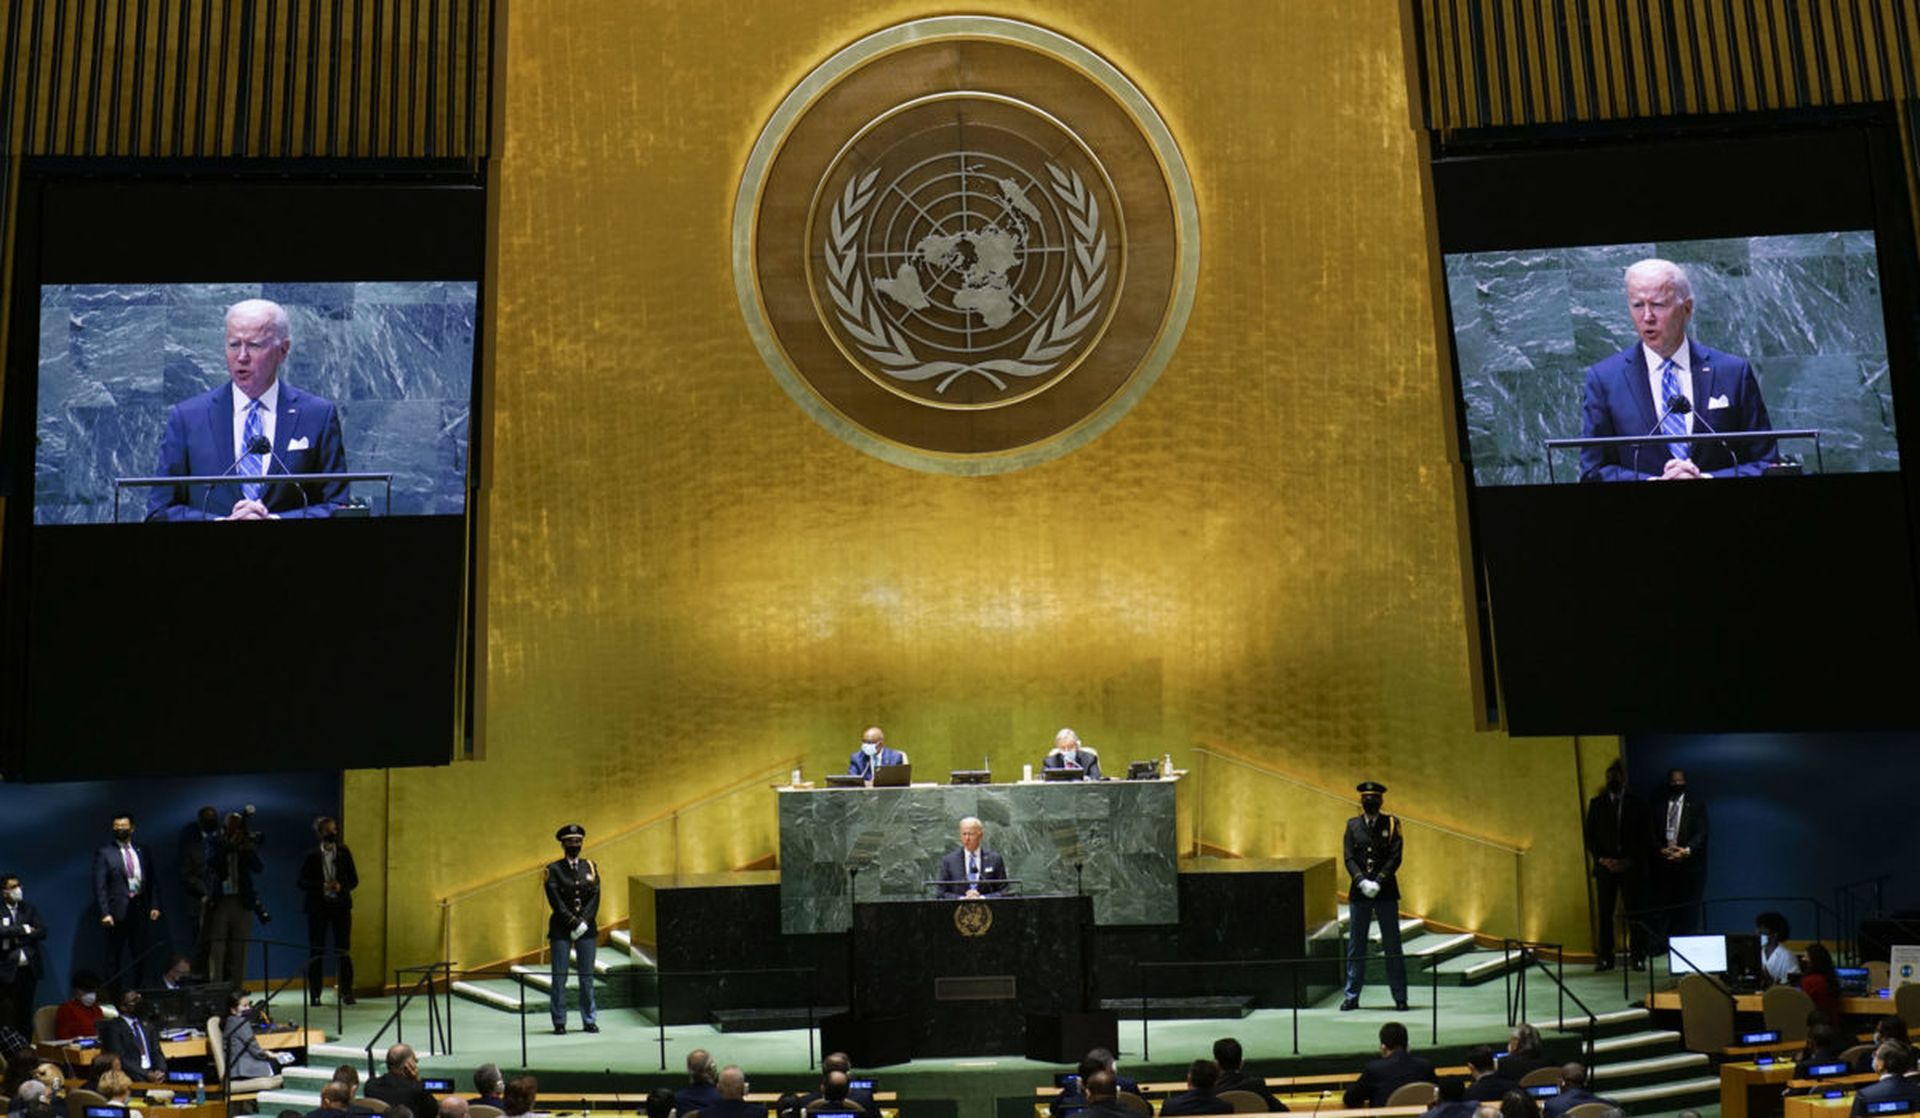 U.S. President Joe Biden addresses the 76th Session of the U.N. General Assembly on September 21, 2021 at U.N. headquarters in New York City. The White House is convening a two-day summit with 30 nations to discuss ways to improve ways to disrupt ransomware criminals and improve defensive resilience. (Photo by Eduardo Munoz-Pool/Getty Images)